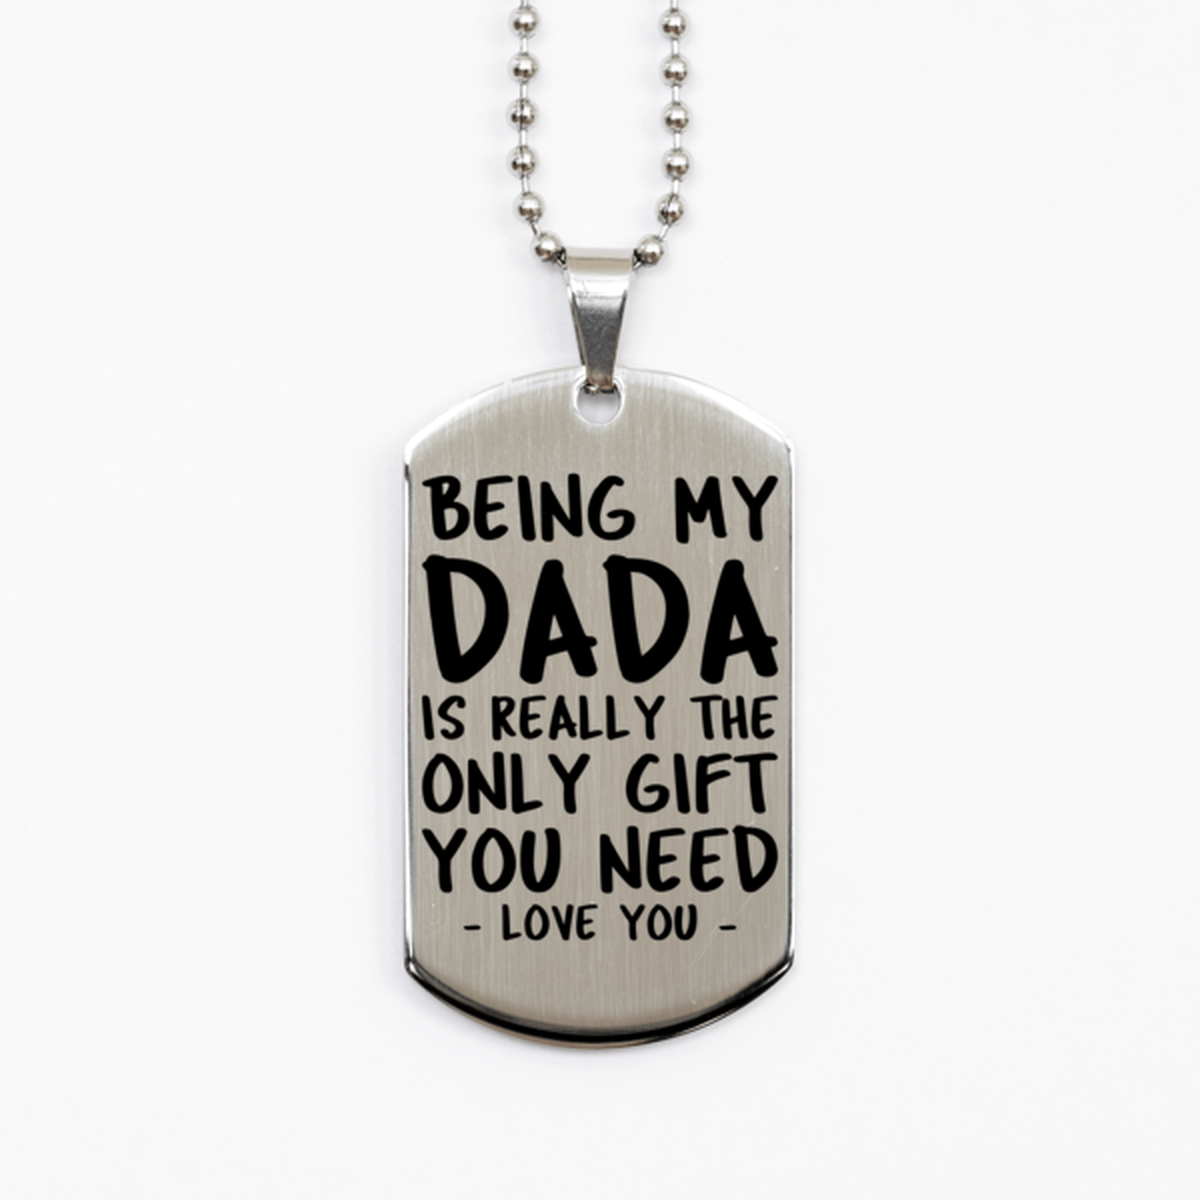 Funny Dada Silver Dog Tag Necklace, Being My Dada Is Really the Only Gift You Need, Best Birthday Gifts for Dada